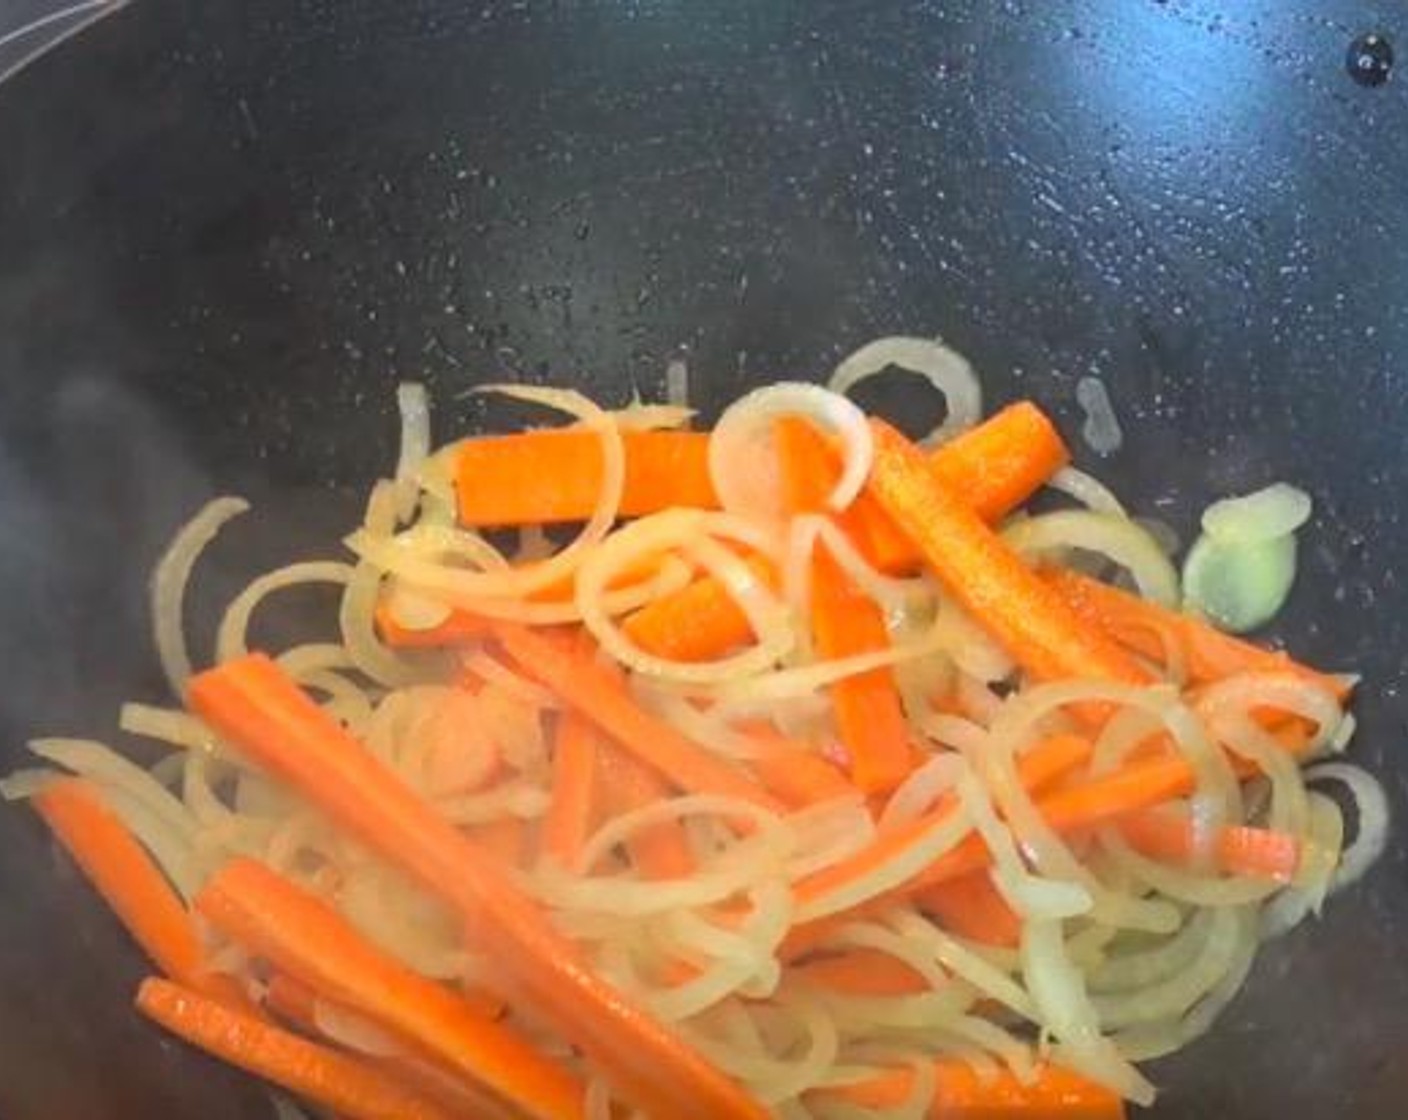 step 4 In the same wok or fry pan, add Yellow Onion (1) and Carrot (1). Stir fry for 2-3 minutes, or until the onion has started to soften.